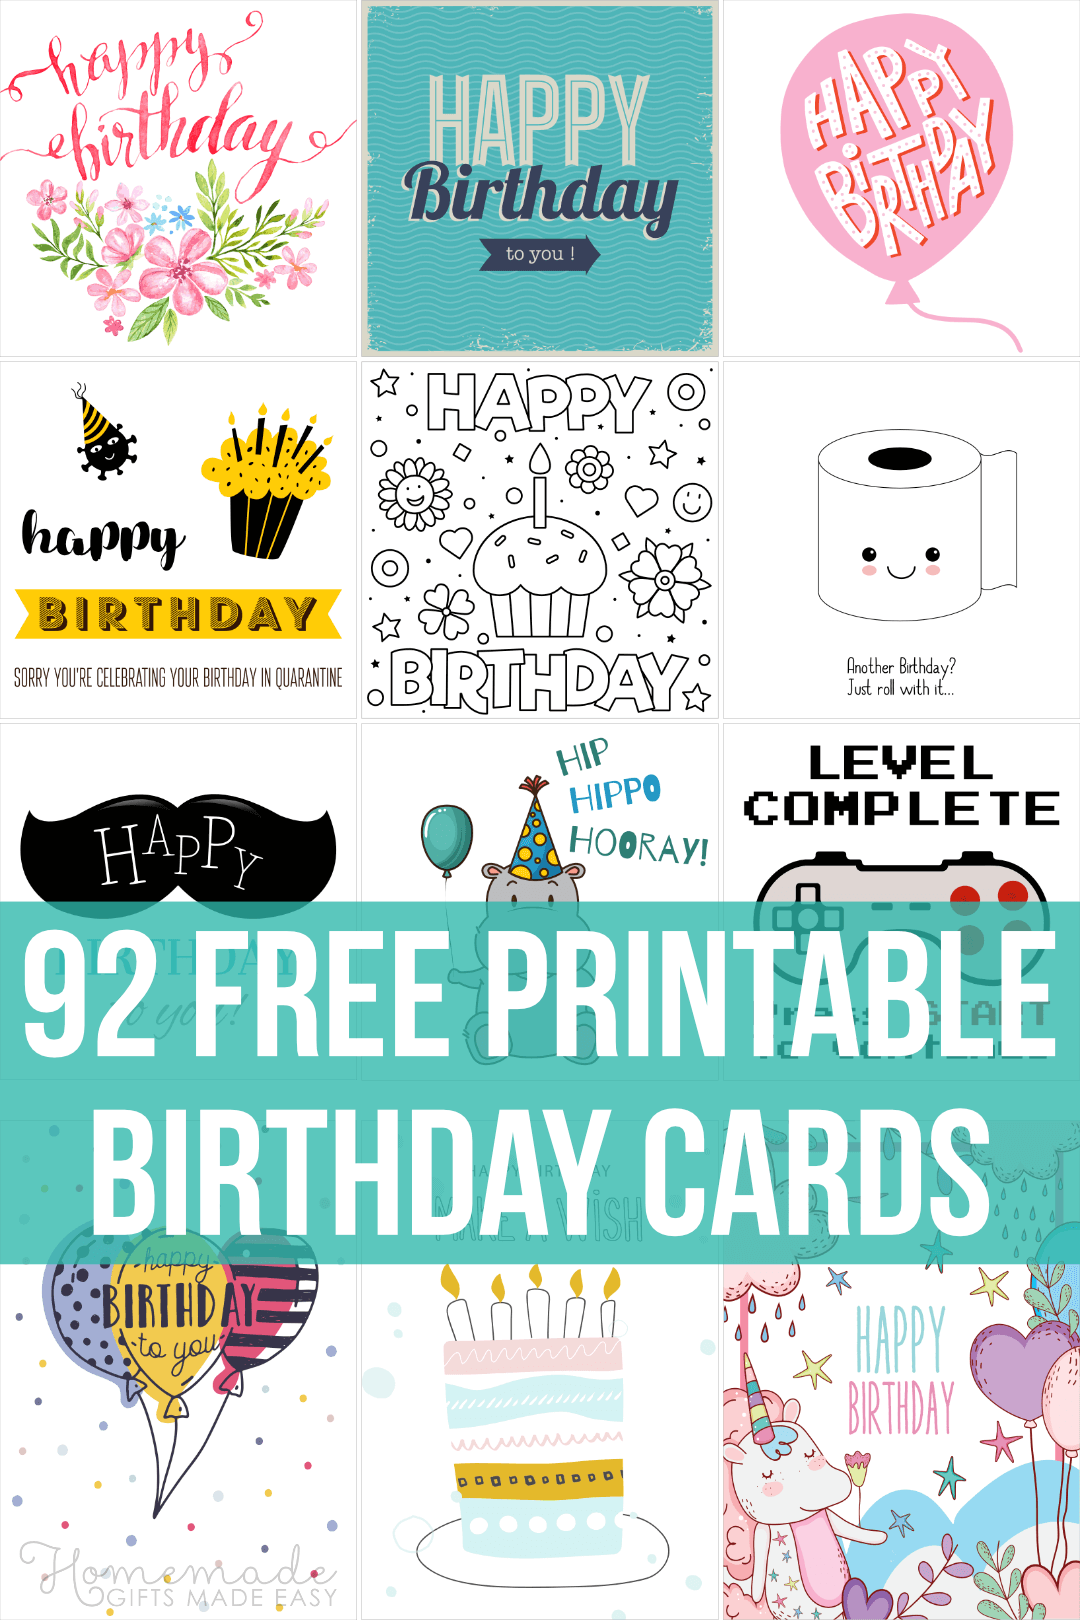 20 Free Printable Birthday Cards For Him, Her, Kids and Adults Intended For Birthday Card Collage Template